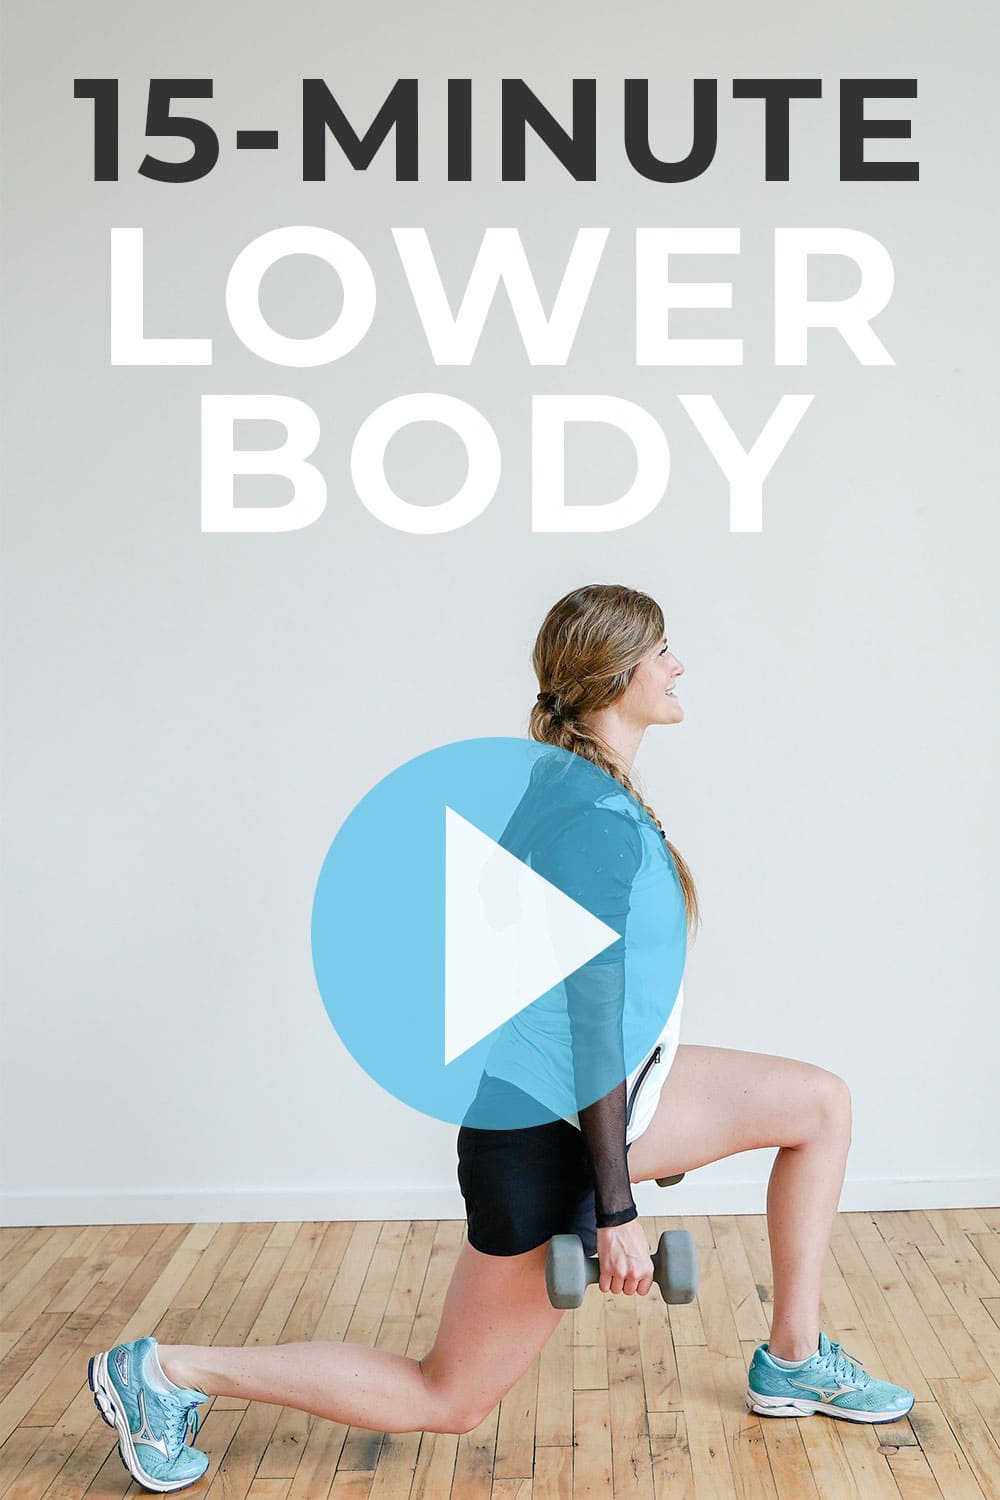 35-Minute Lower Body Dumbbell Workout | Nourish Move Love